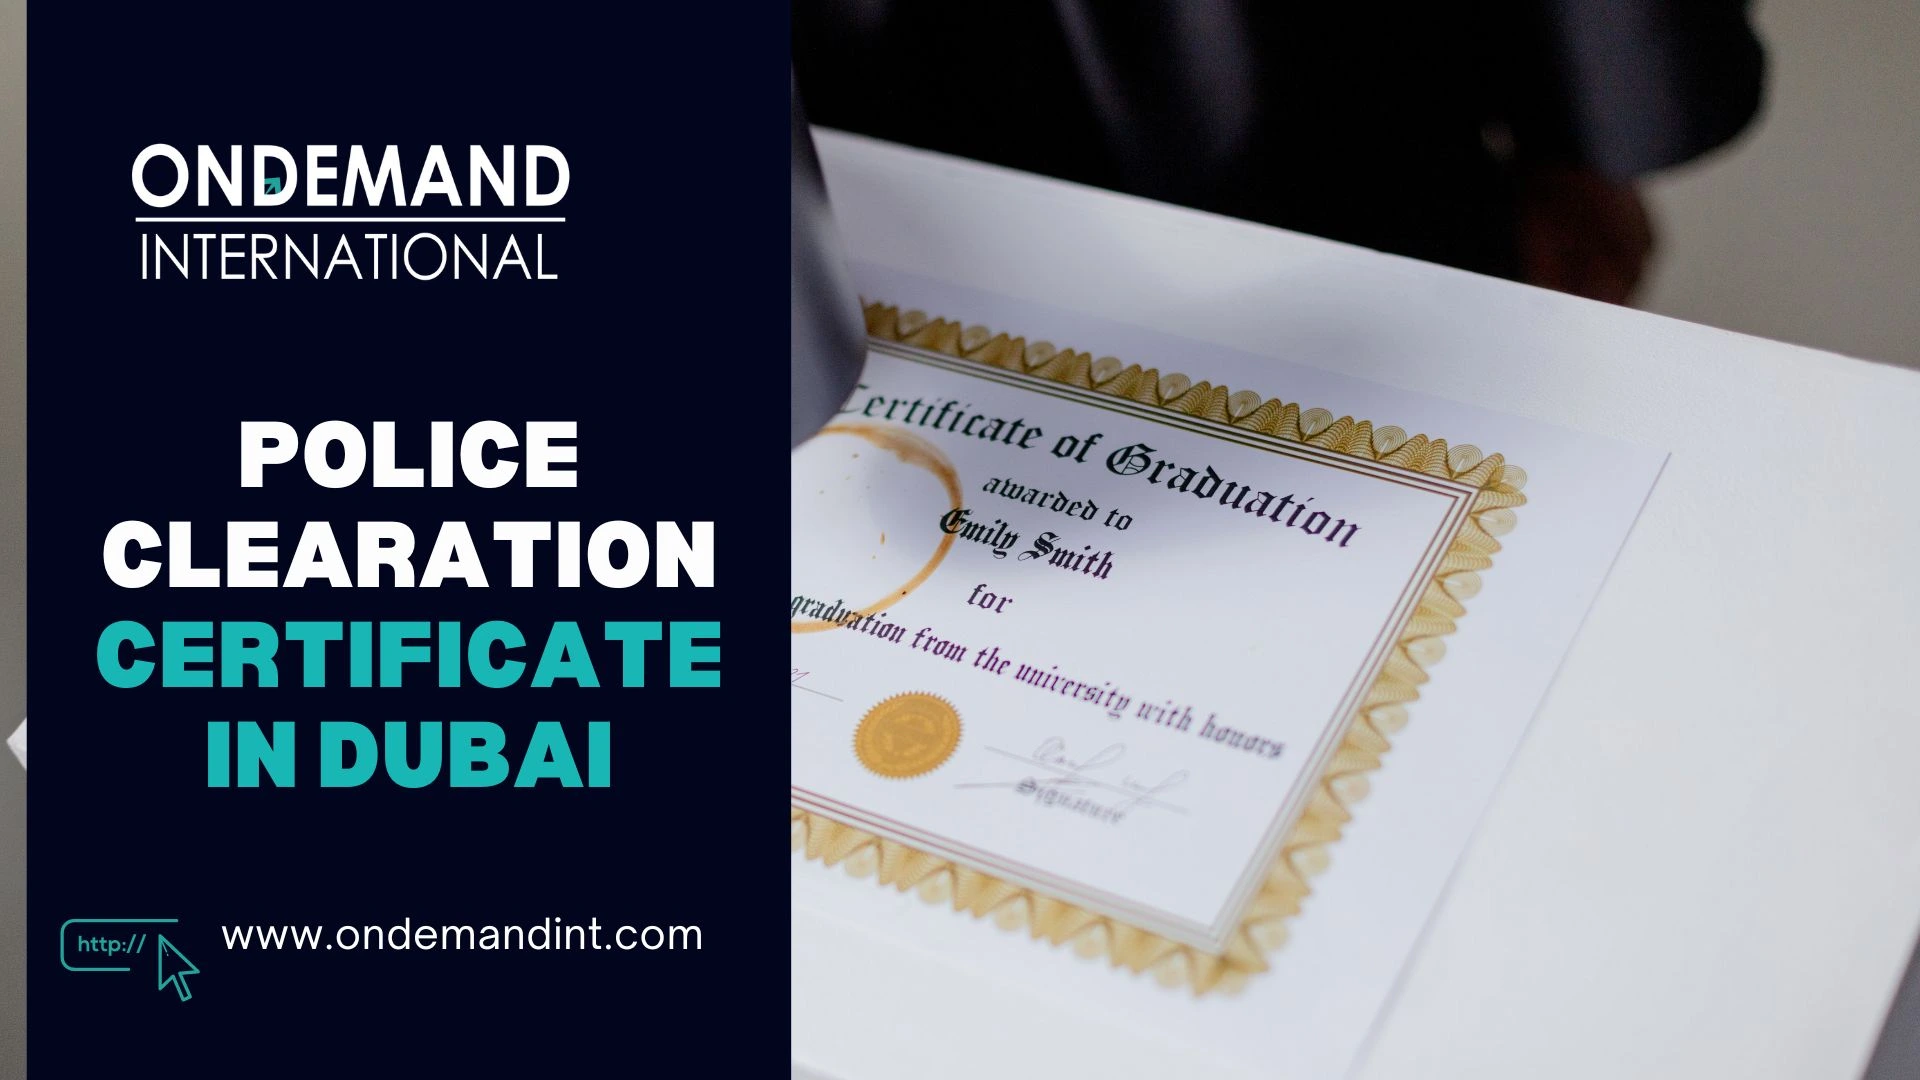 Obtain a Police Clearance Certificate in Dubai in 5 Easy Steps